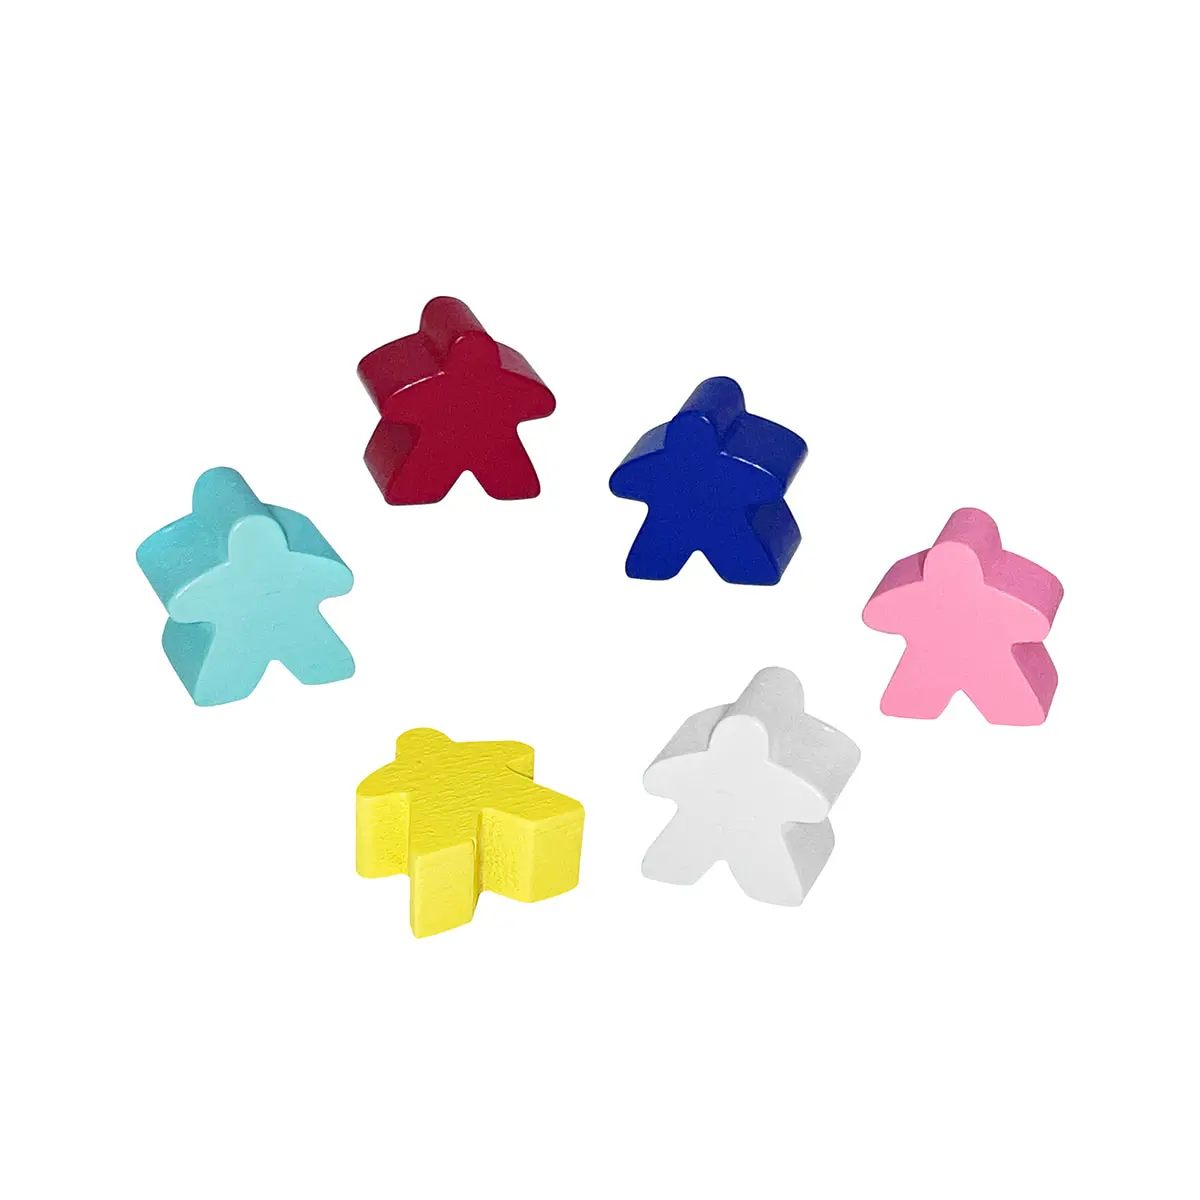 Board Game Pieces Accessories Wooden Meeples